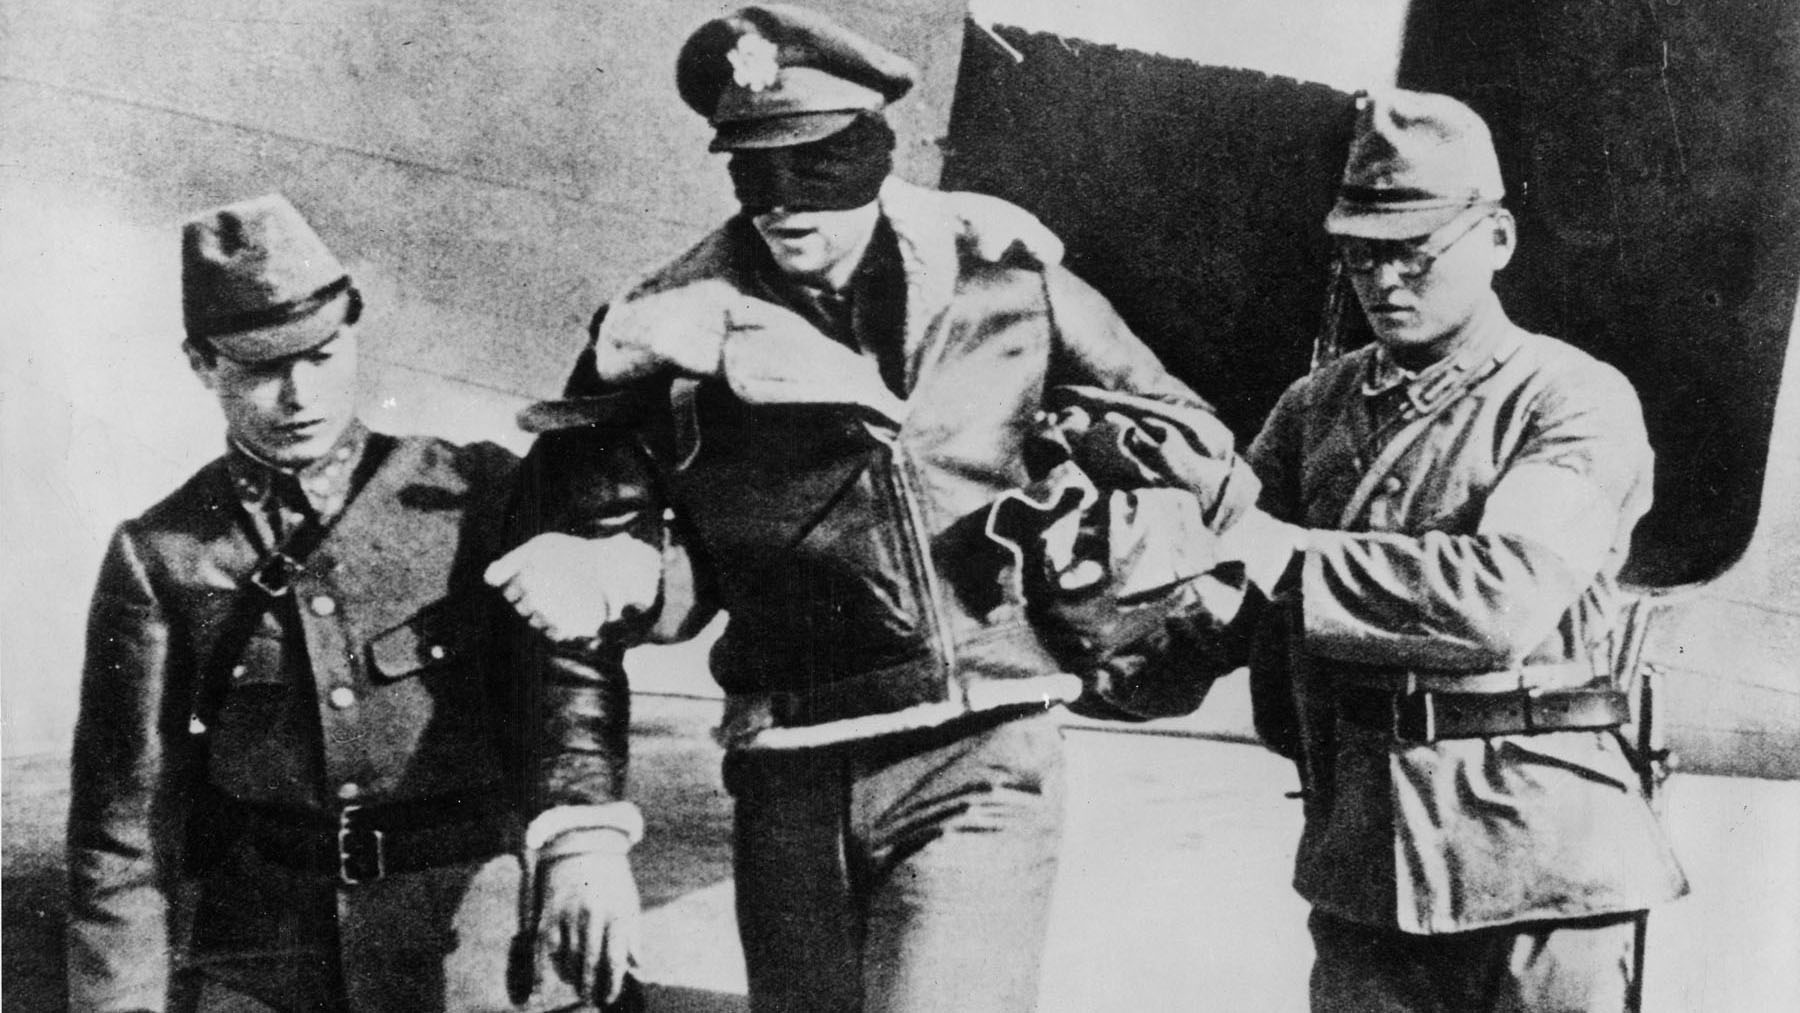 The Imperial Japanese Army captured eight of the Doolittle Raiders, including 1st Lt. Robert L. Hite. Three were executed. A fourth died of starvation. Lt. Hite and the three other remaining POWs were liberated in August 1945. (photo credit: U. S. Air Force)